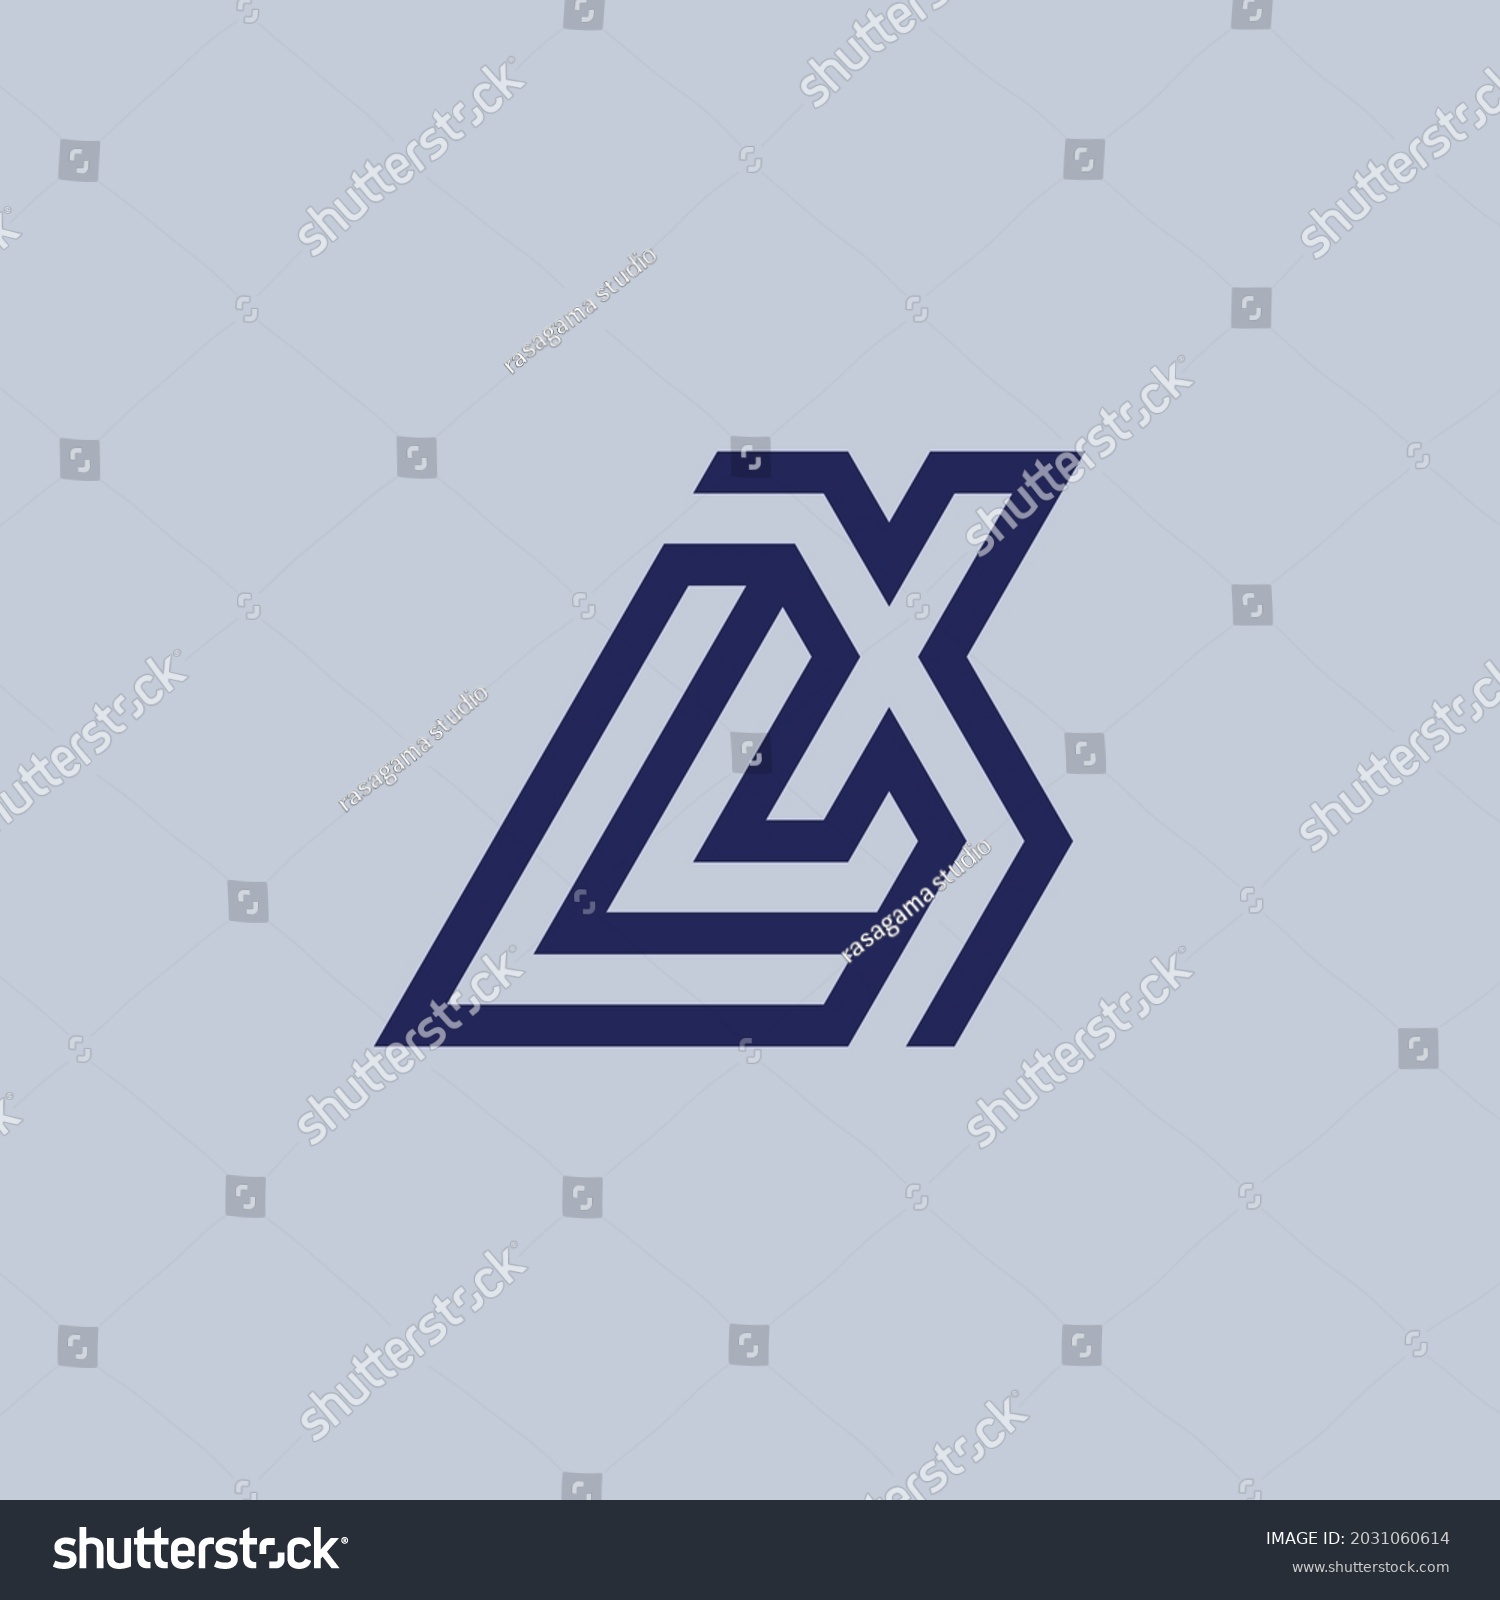 SVG of LX lettermark logo. alphabet logo that combines 2 letters into new mark or symbol that is unique and original. consists of letters L and X.  svg